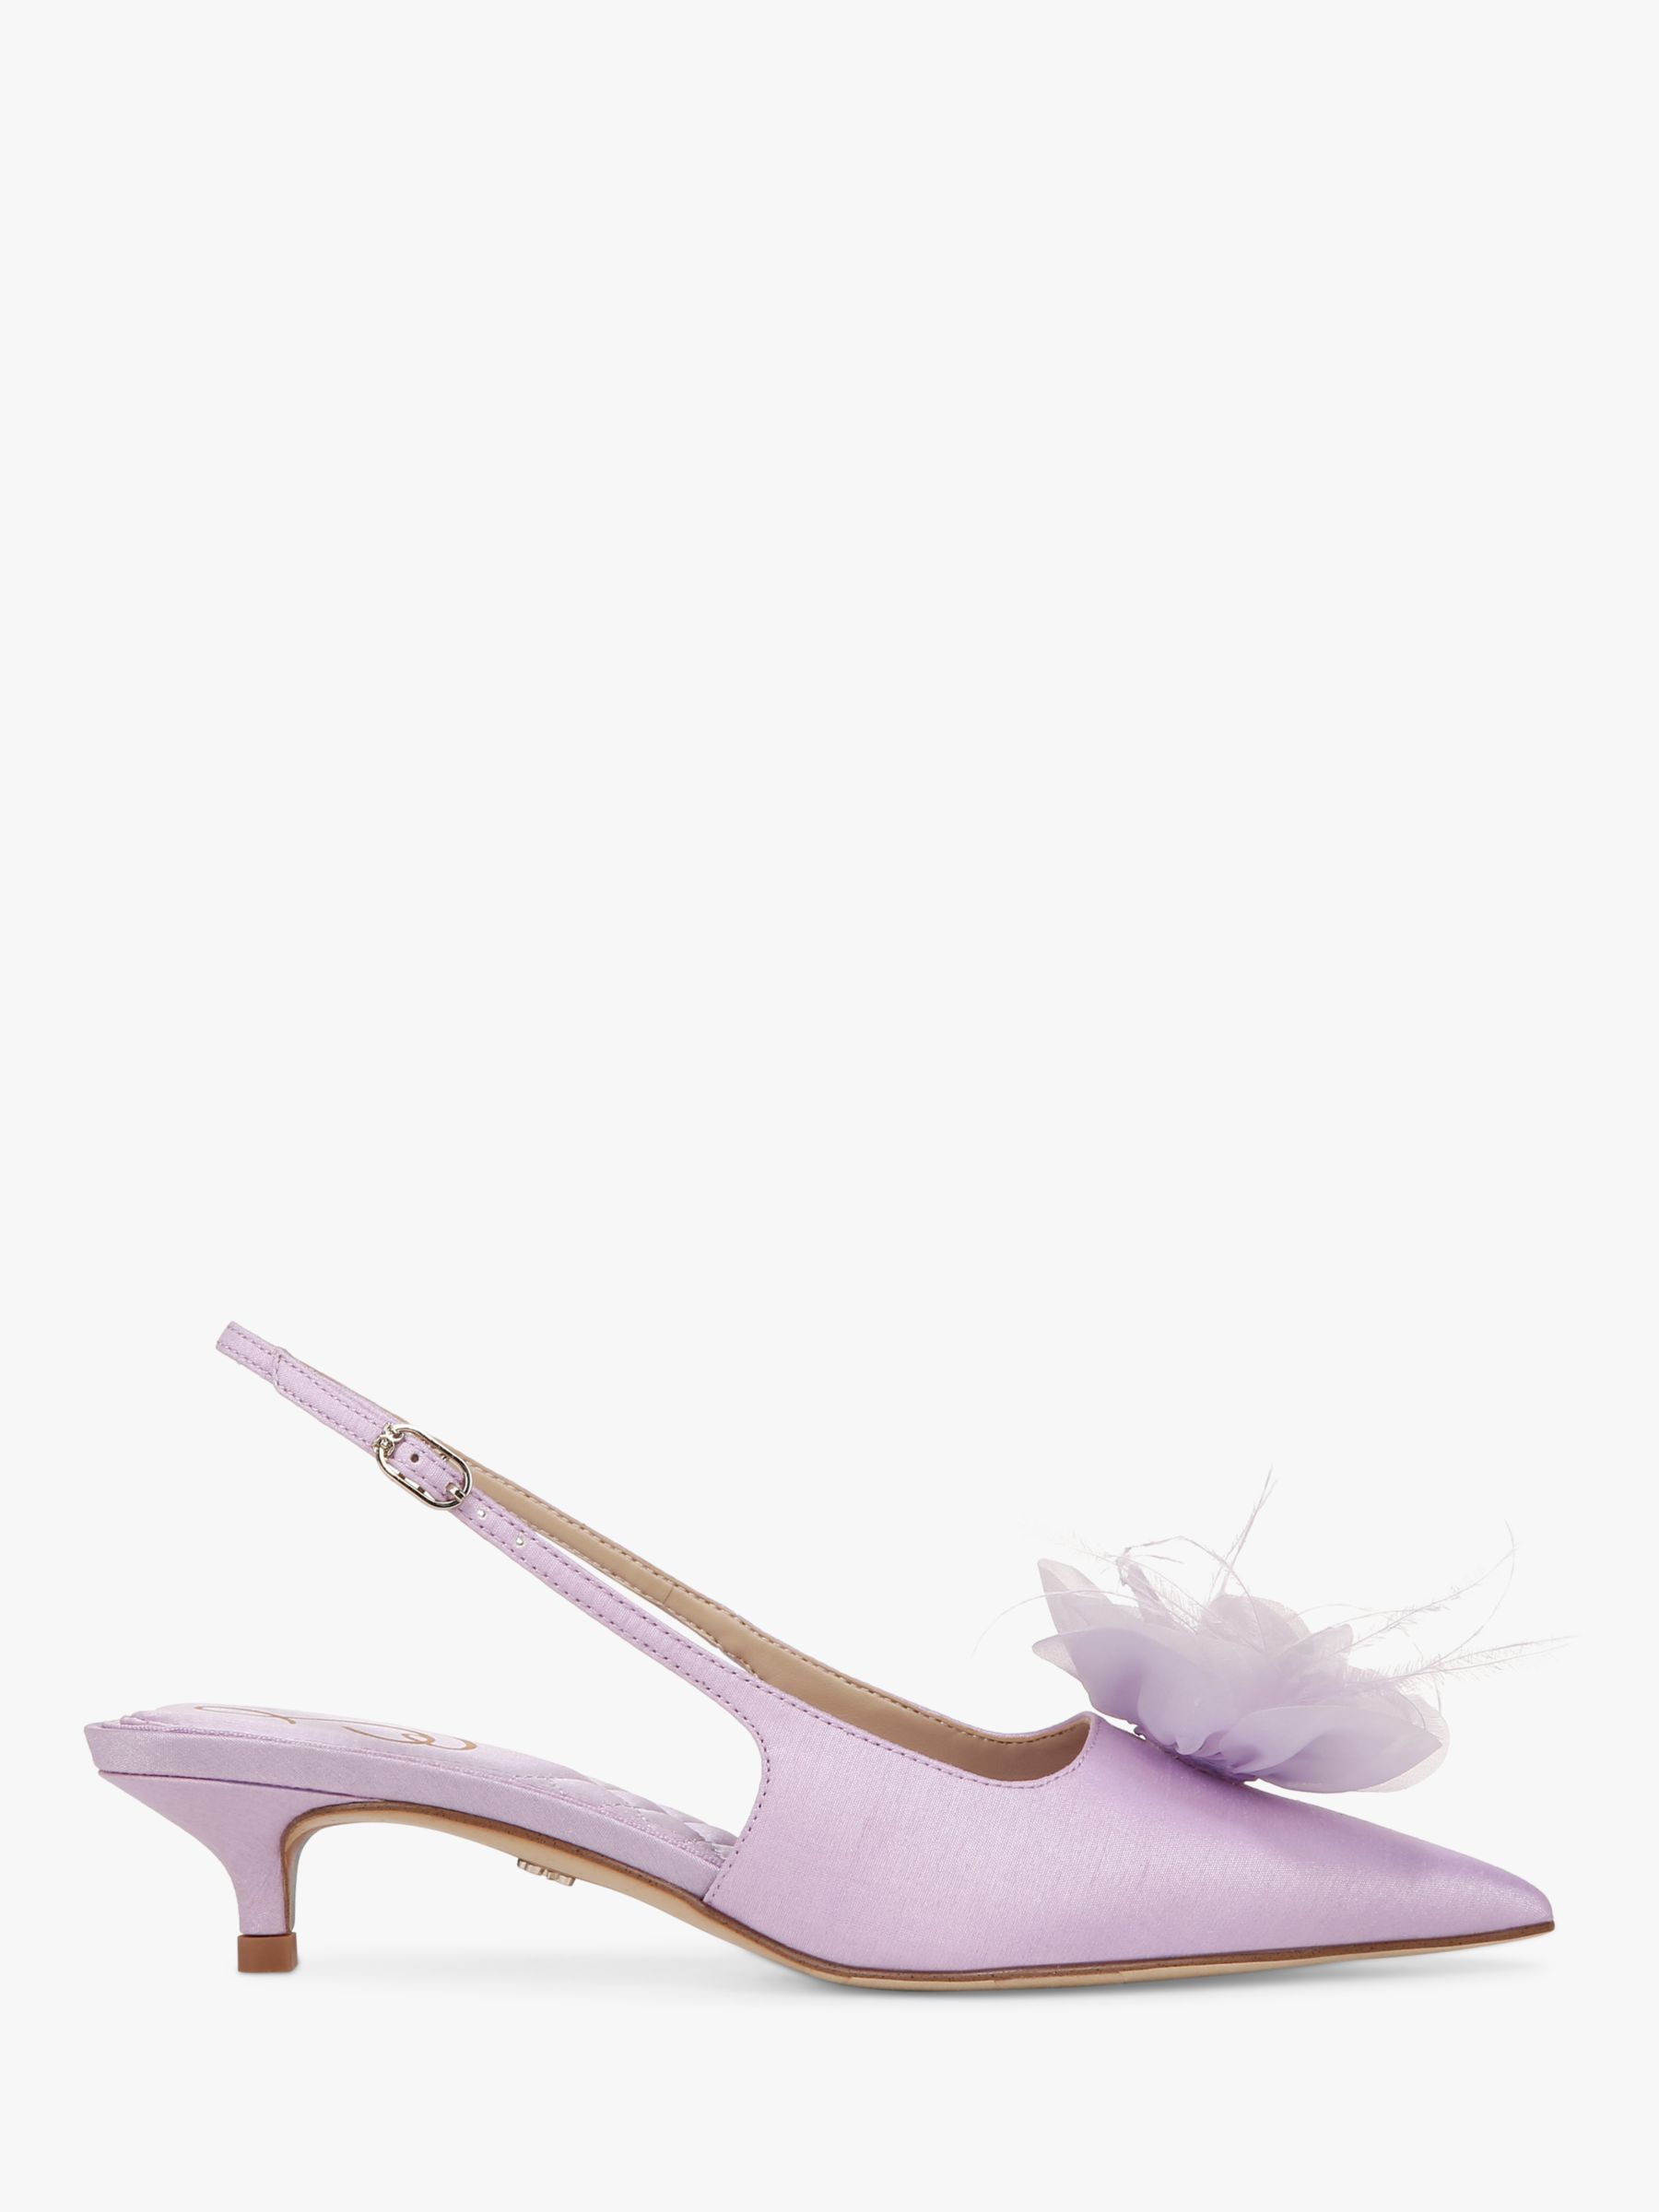 Sam Edelman Faye Slingback Court Shoes, Orchid Blossom at John Lewis ...